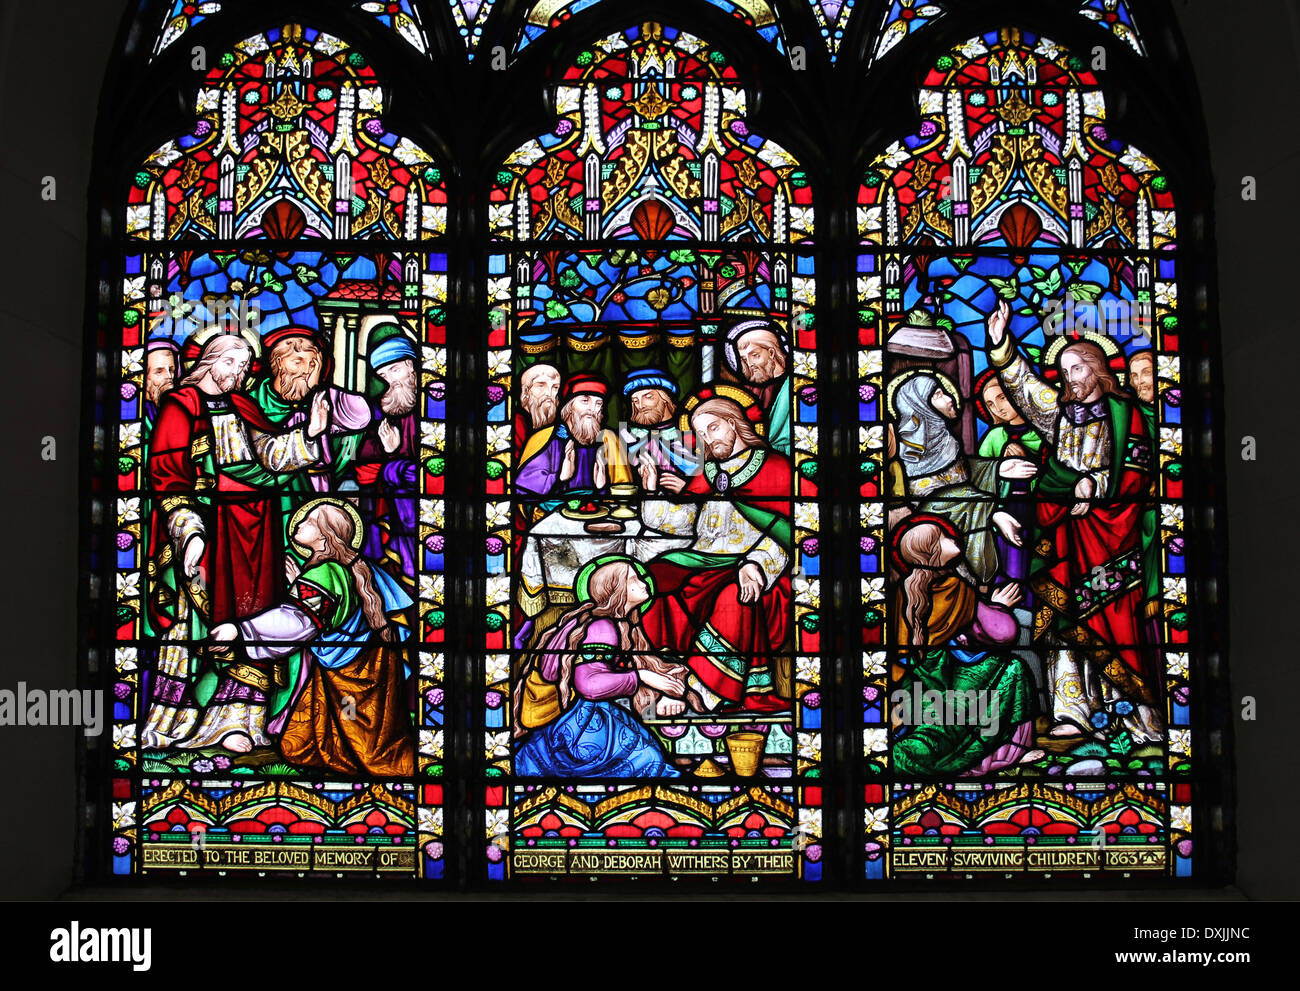 Memorial Window to George & Deborah Withers, 1863 in St Georges Church, Everton, Liverpool, UK Stock Photo